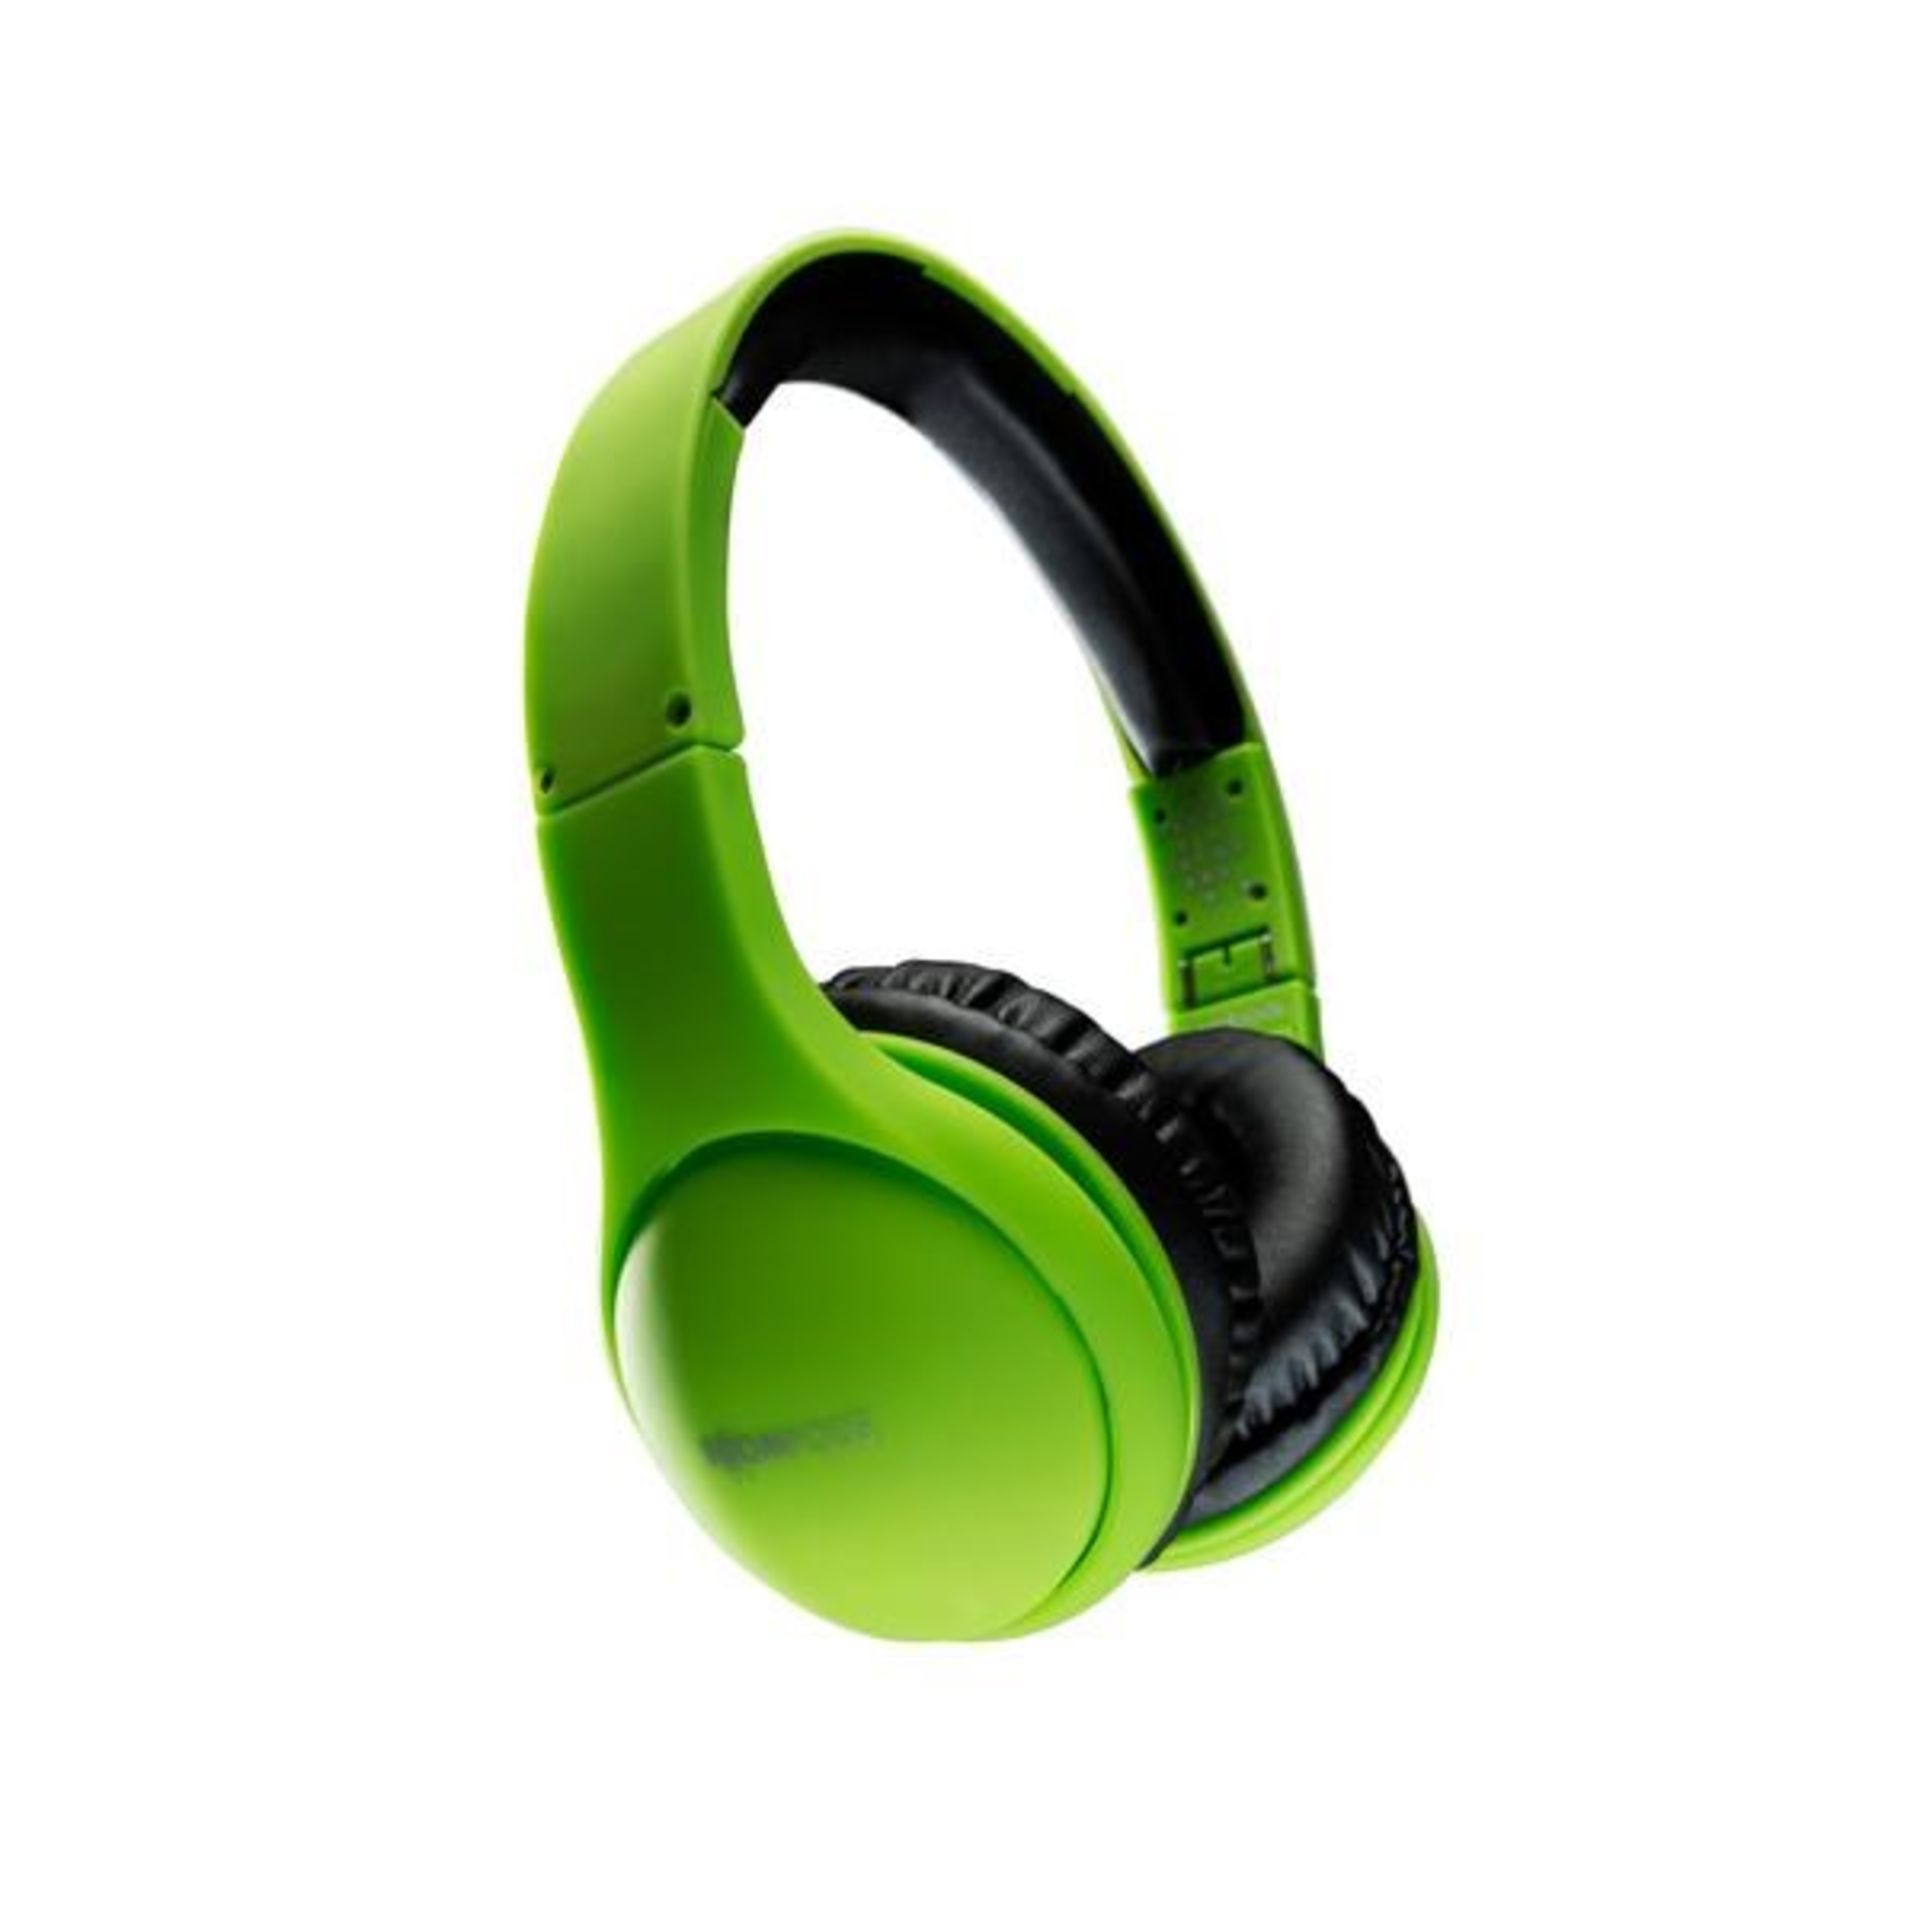 V Brand New Boompods Headpods Foldable Soft Touch Headphones In Green Includes IPhone Remote With - Image 2 of 2